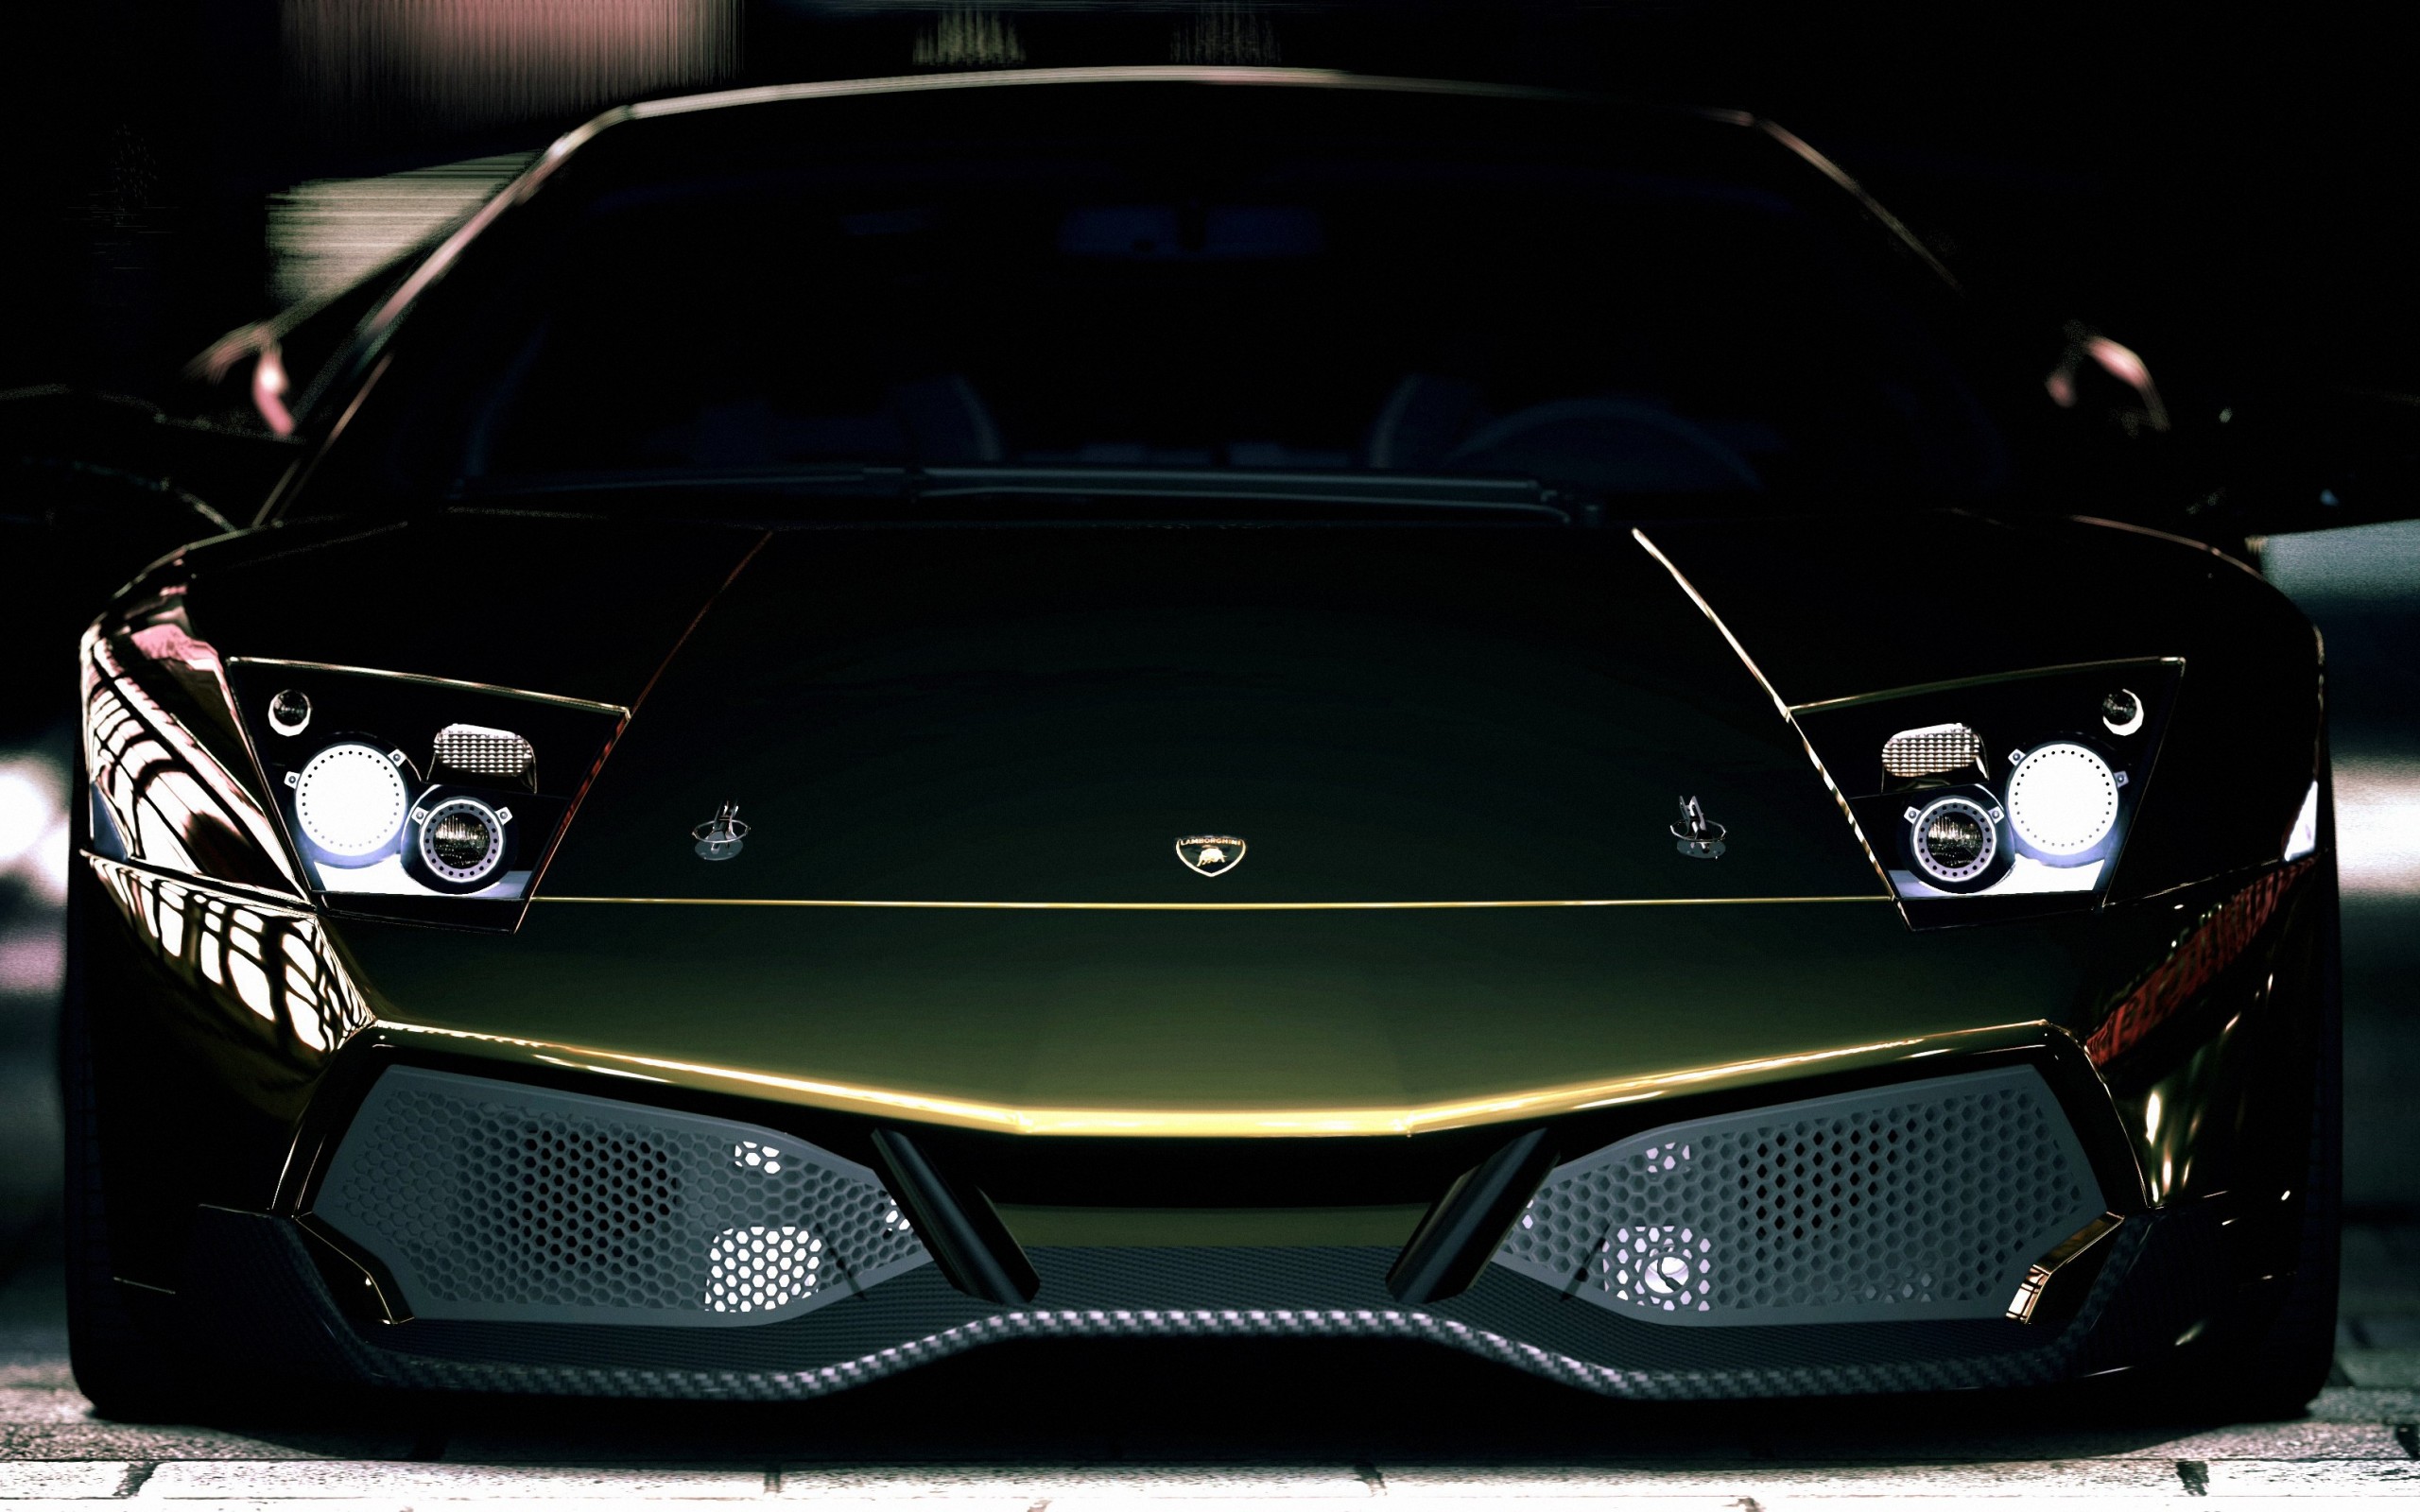 Free download Lamborghini Wallpapers HD Wallpapers [2560x1600] for your